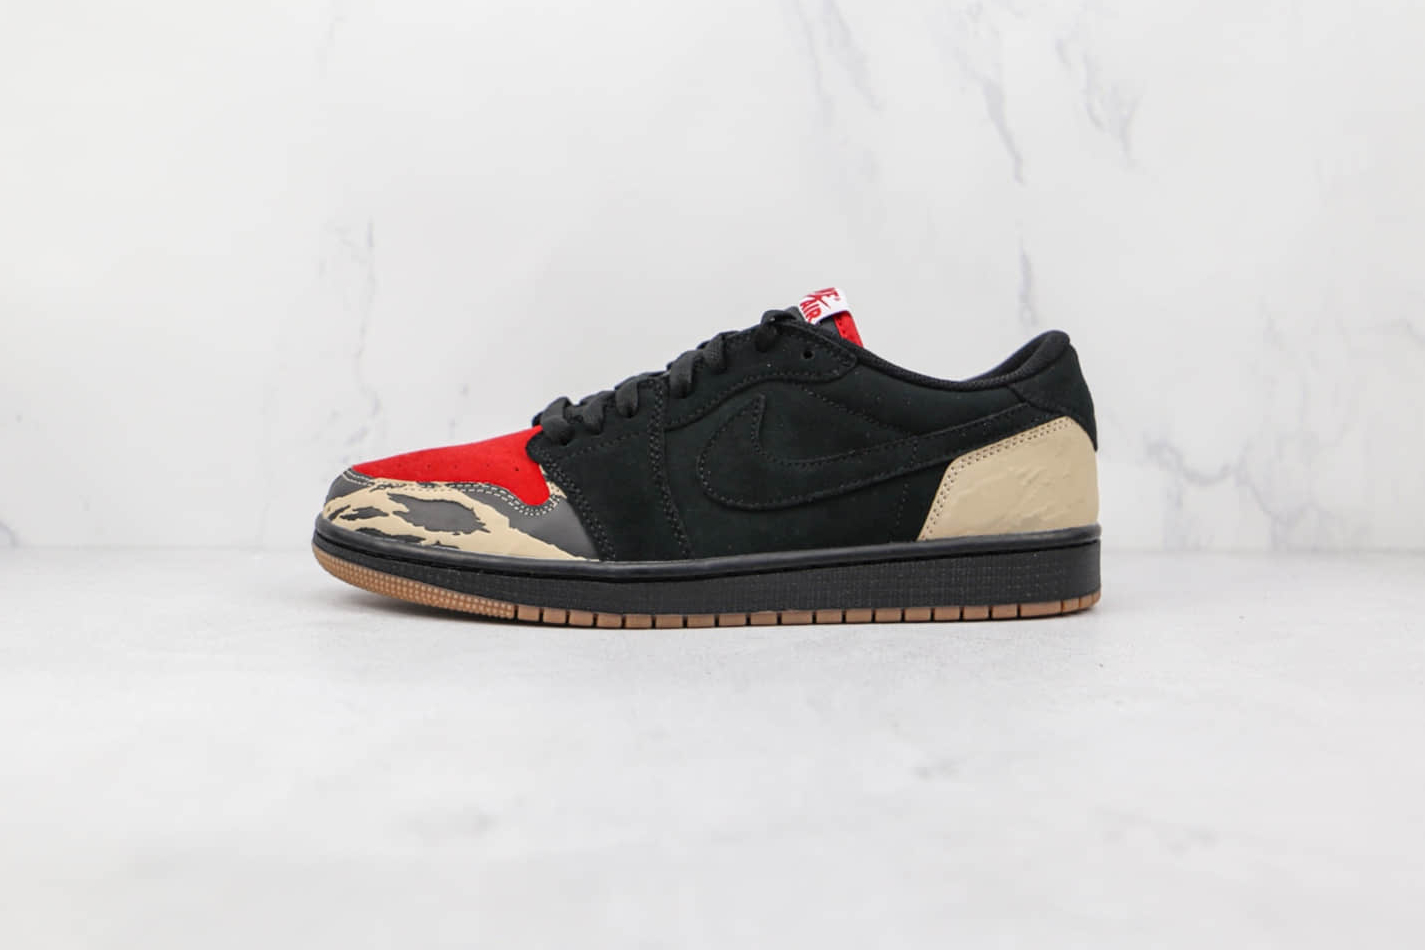 SoleFly x Air Jordan 1 Low Retro OG SP 'Everglades' DN3400-001 - Limited Edition Collab!